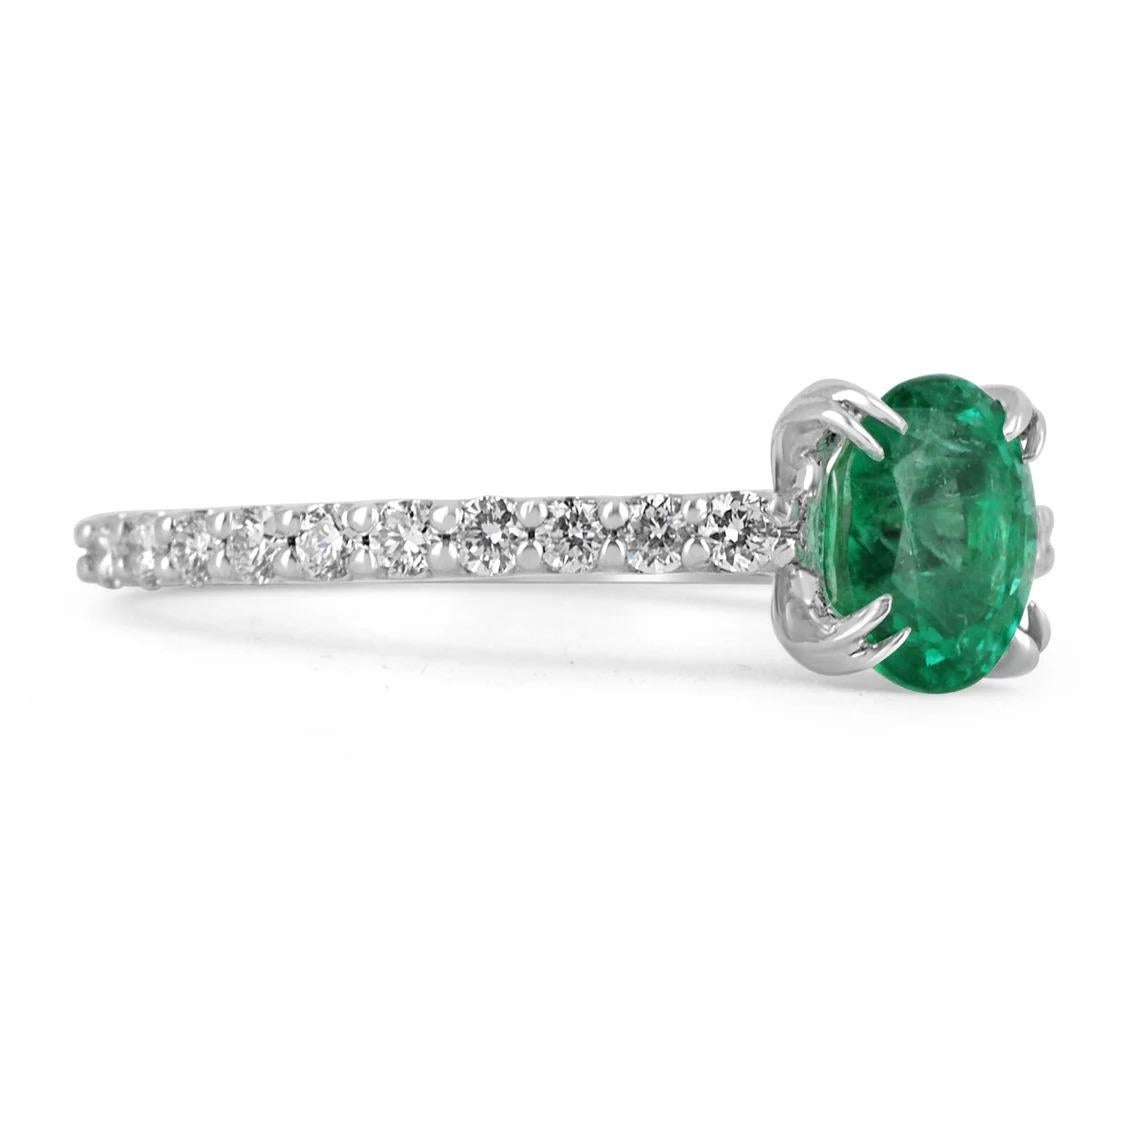 Elegantly displayed is a natural oval-cut emerald and diamond ring. The center gem is a beautiful quality, oval cut, emerald filled with life and brilliance! Among the emeralds, impressive qualities are their vibrant color and beautiful eye clarity.